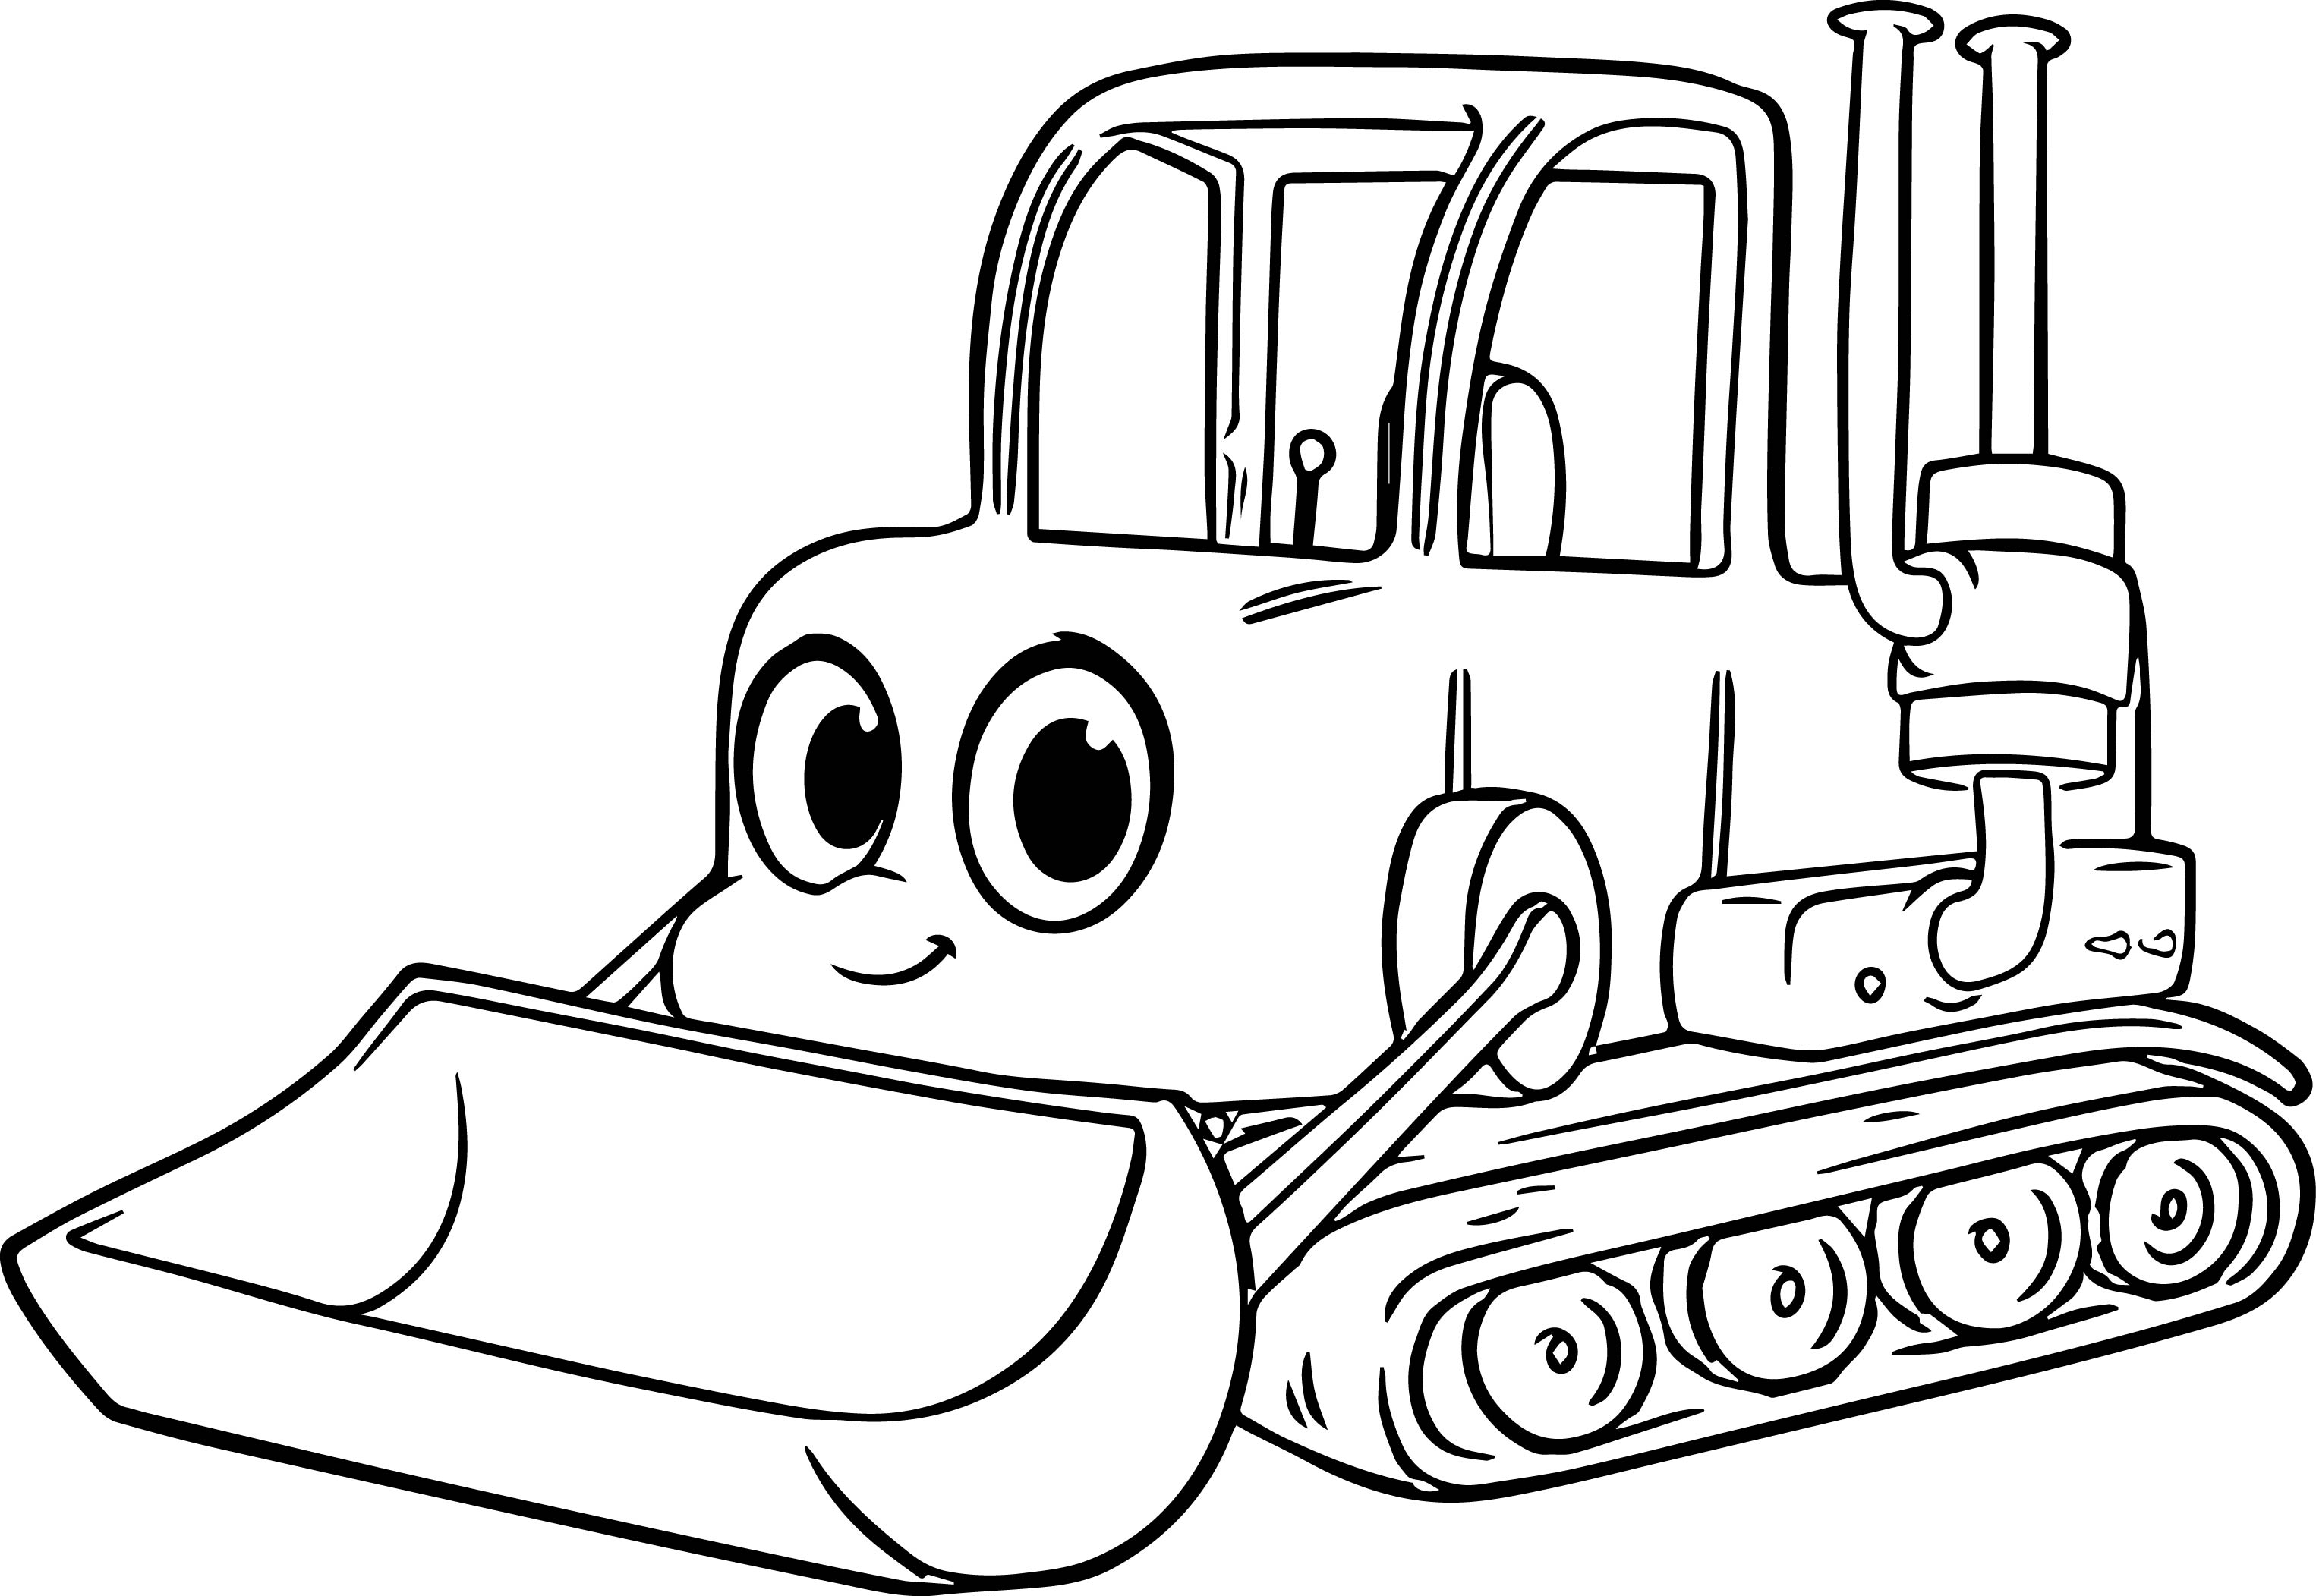 Heavy Equipment Coloring Pages at GetColorings.com | Free ...